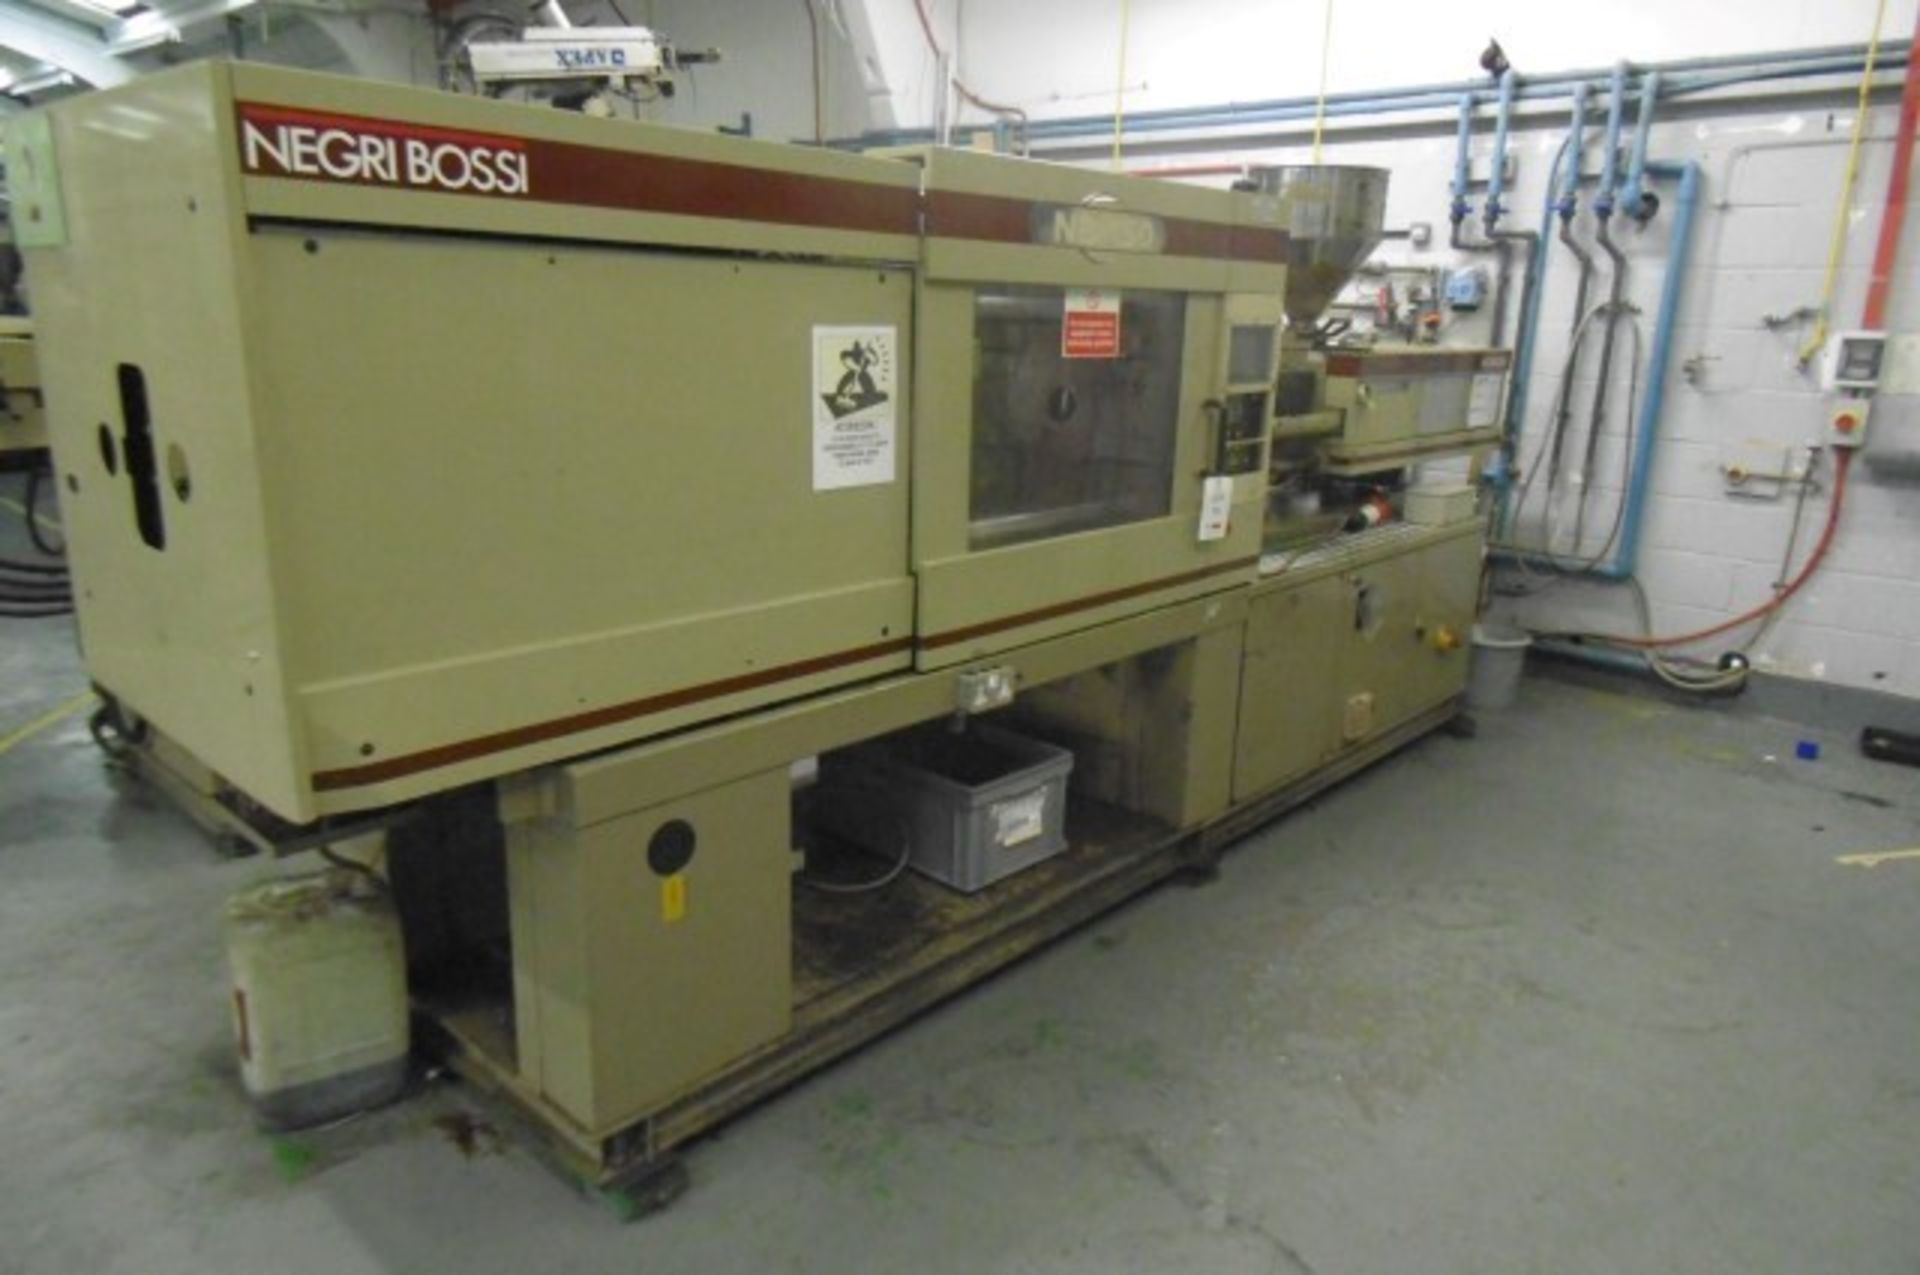 Negri Bossi NB150 horizontal plastic injection moulding machine Serial Number: 52310 Year Of